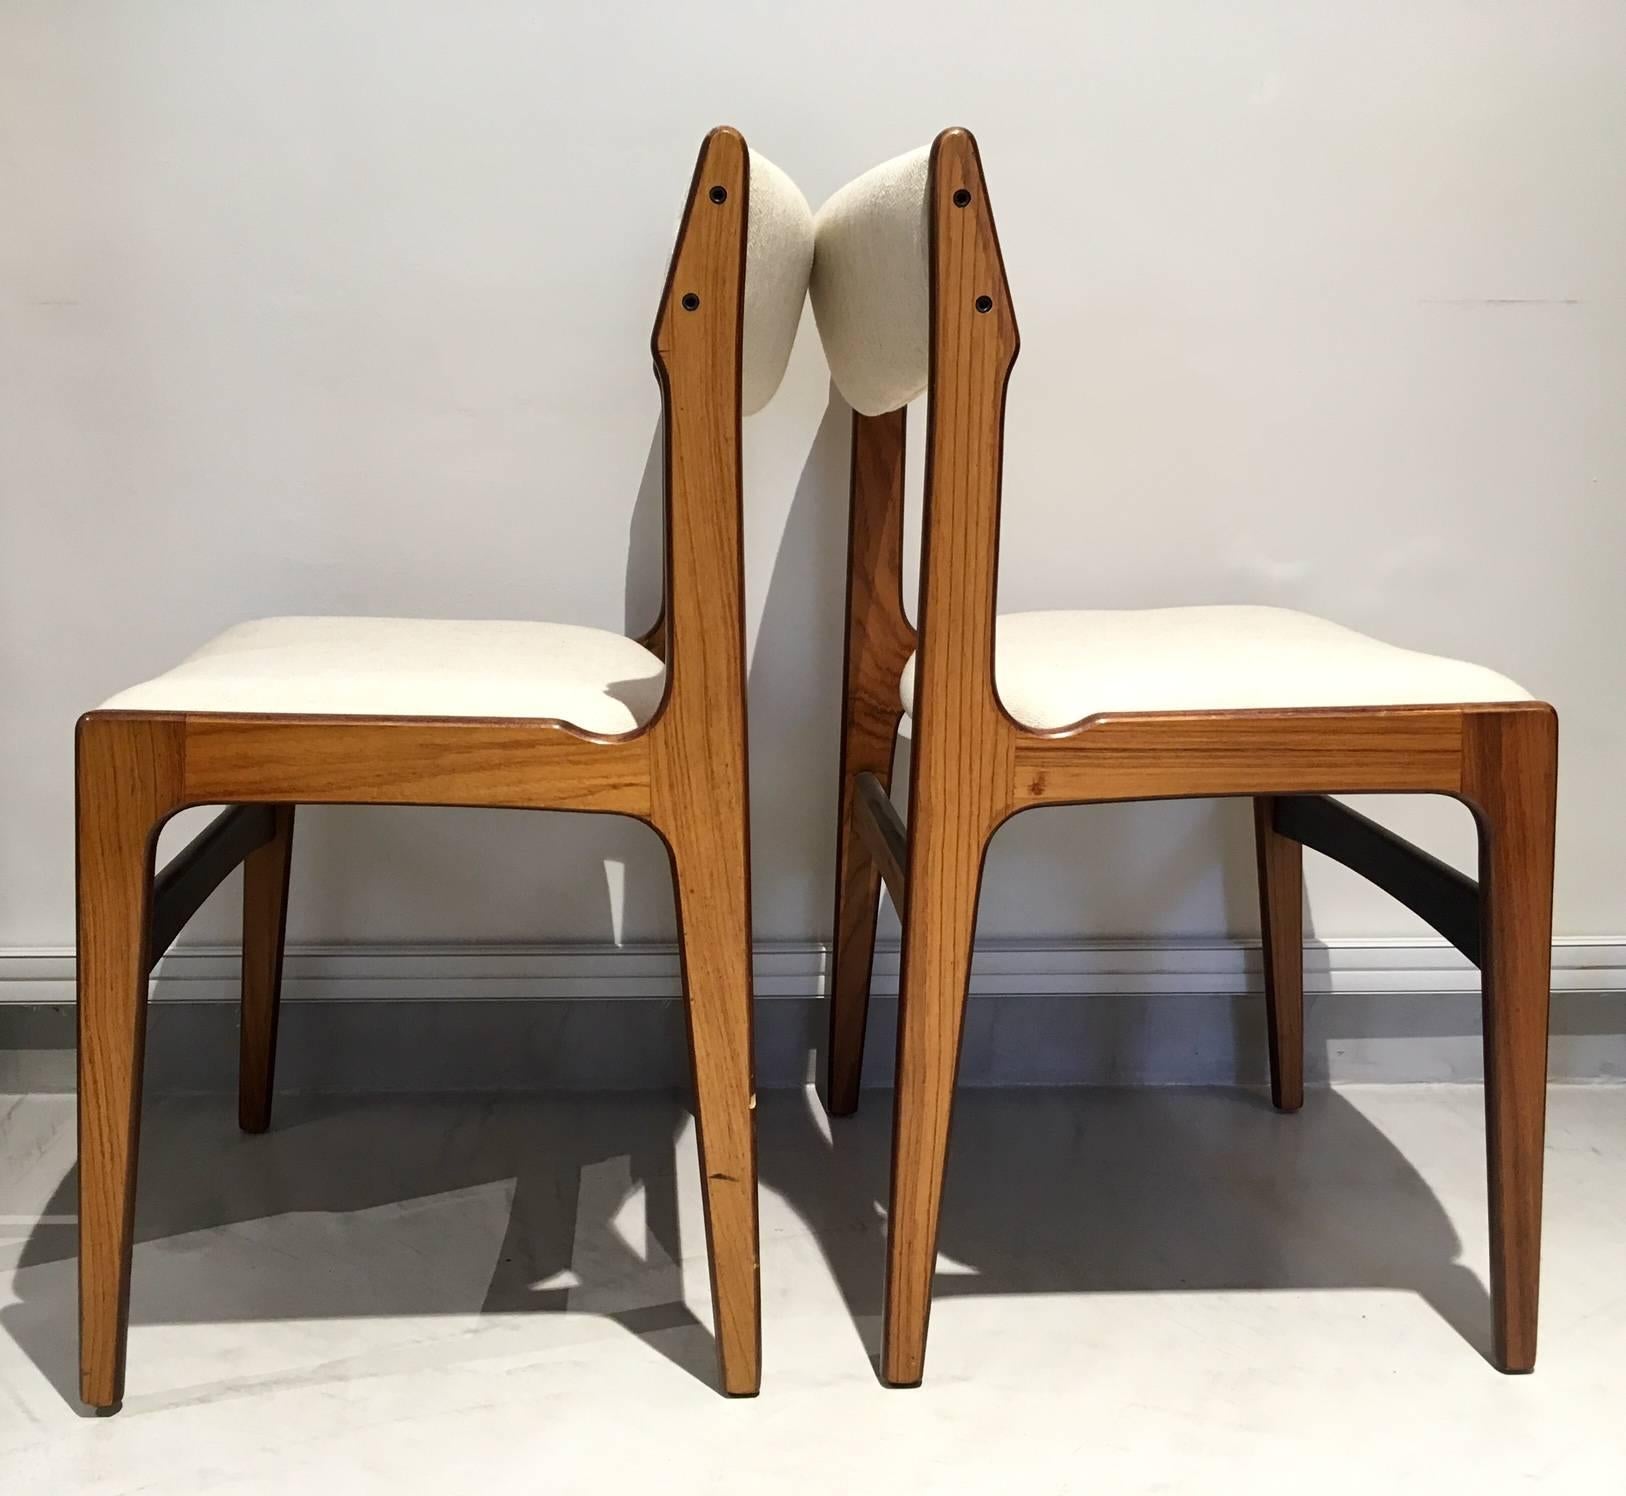 Hardwood Set of Six Danish Modern Wooden Dining Chairs with White Covers